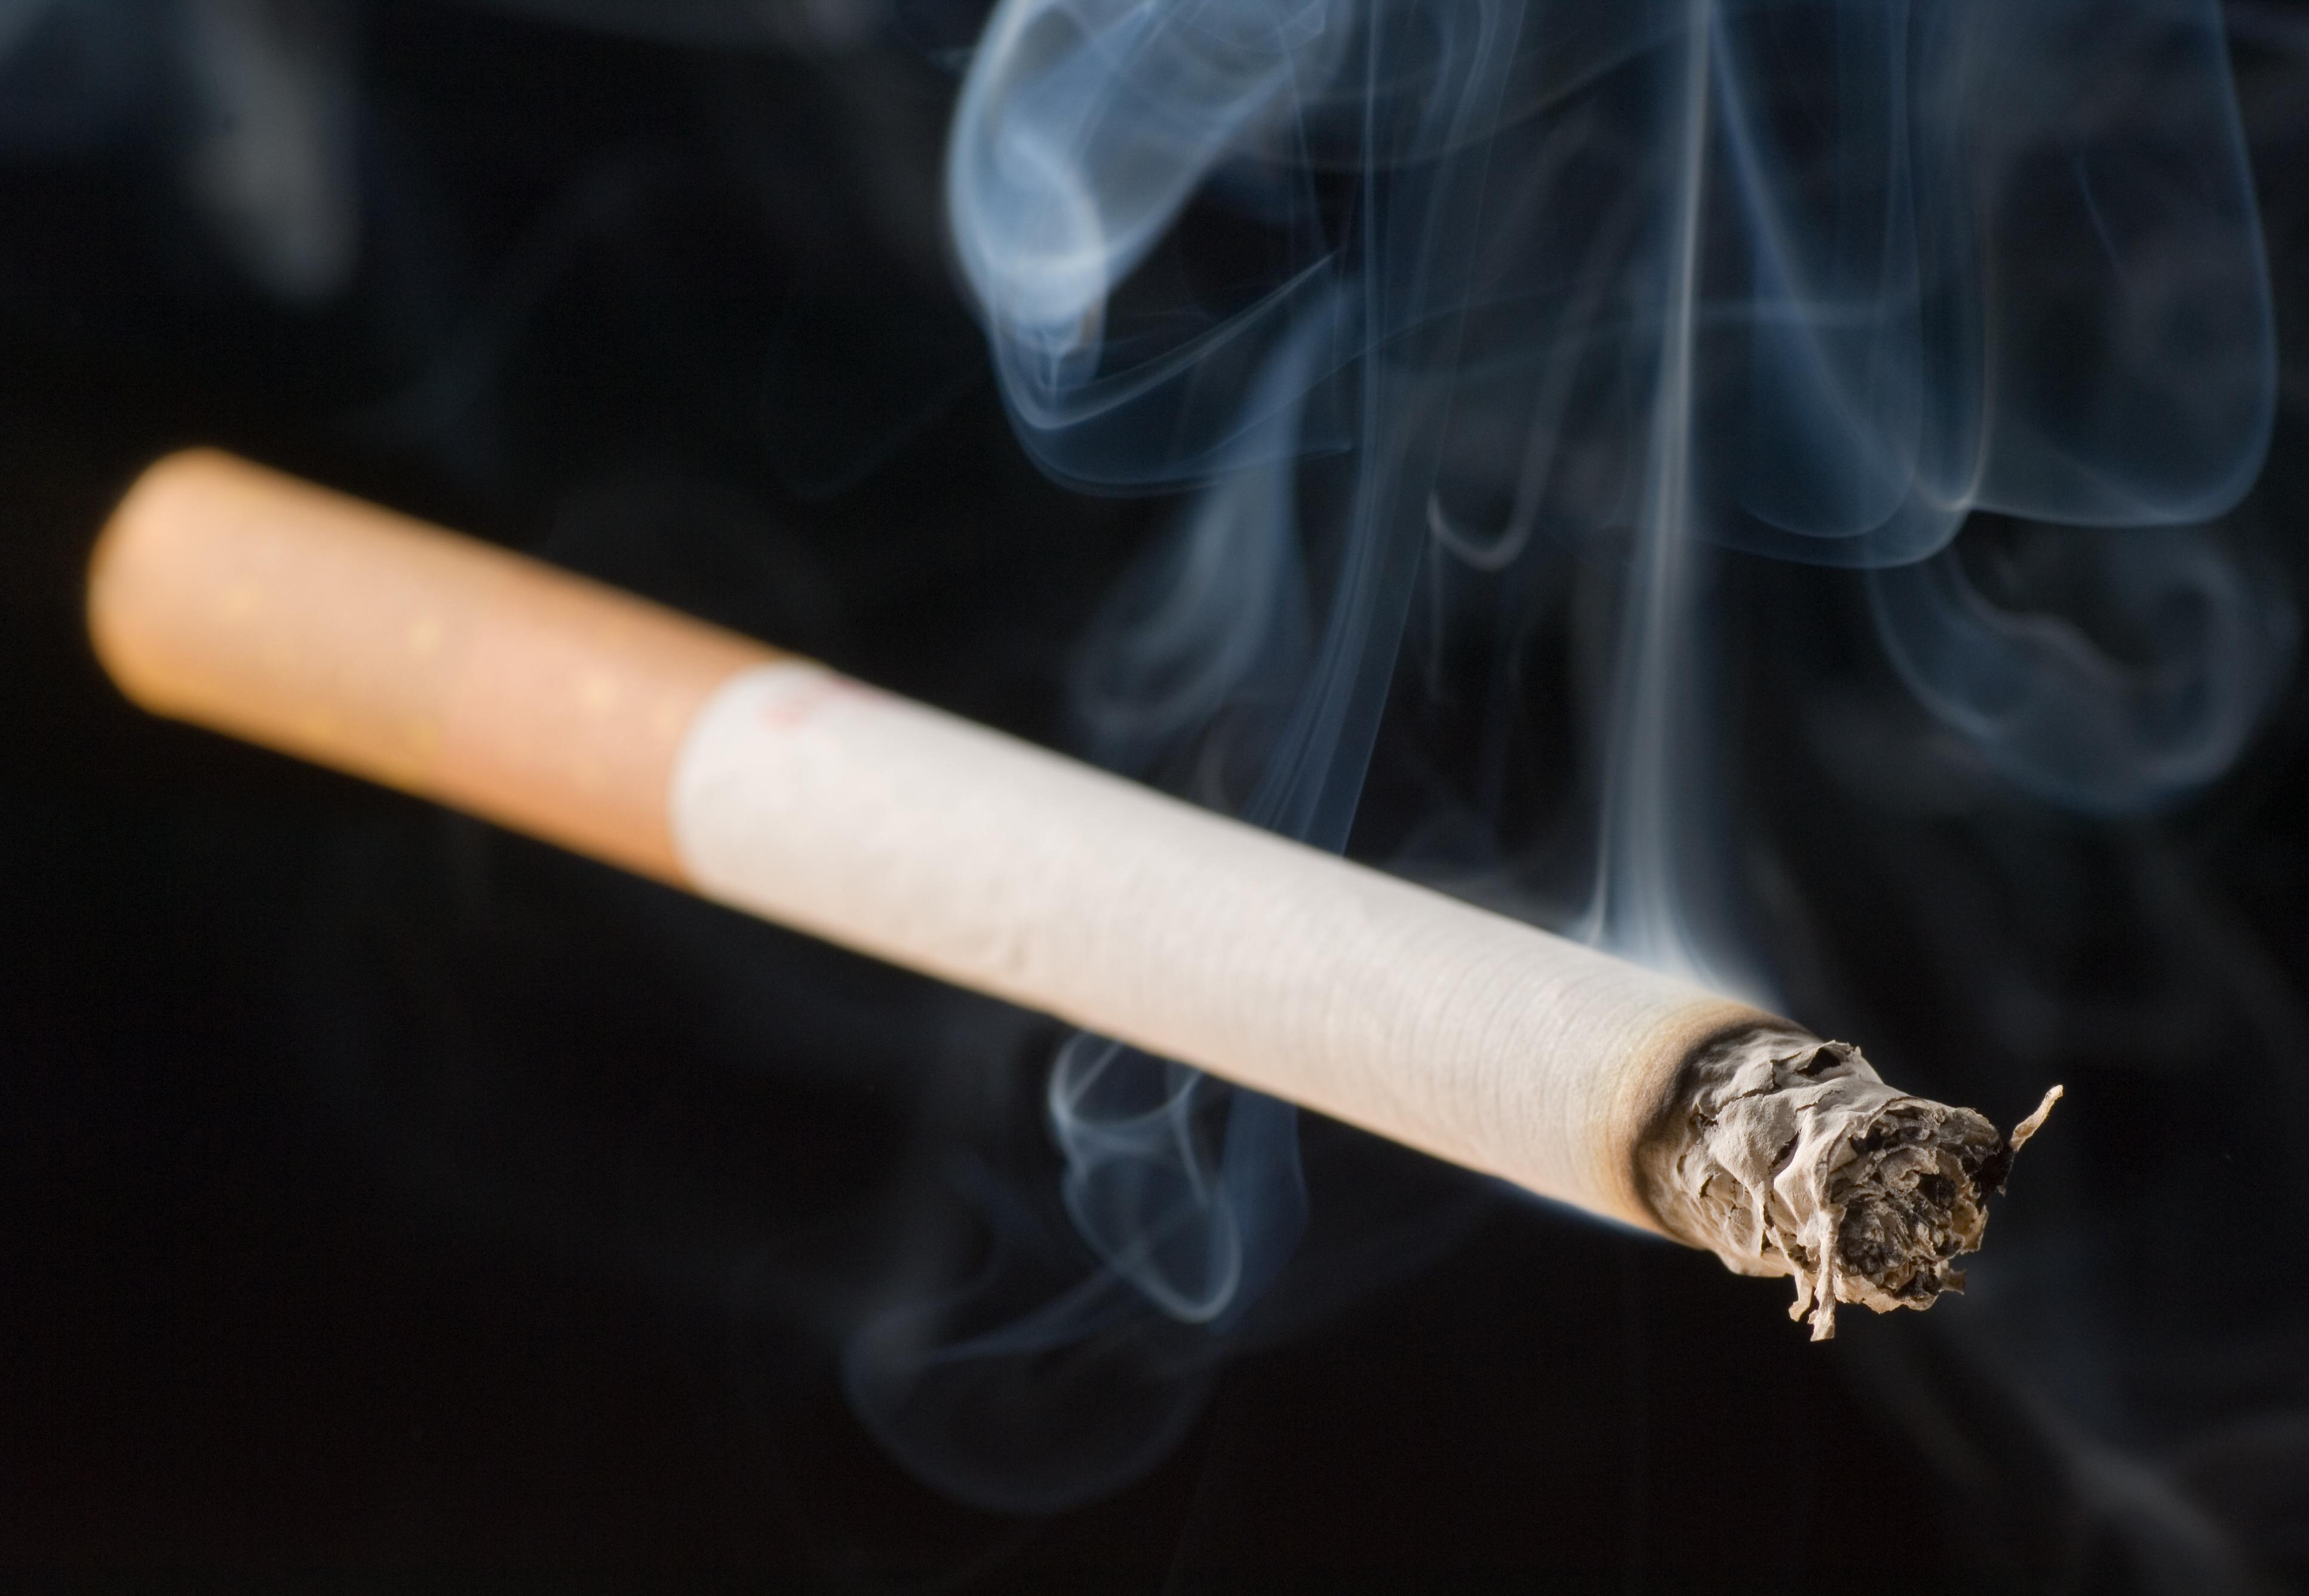 How Seniors Can Quit Smoking With the Help of Medicare and Other Tools | HuffPost